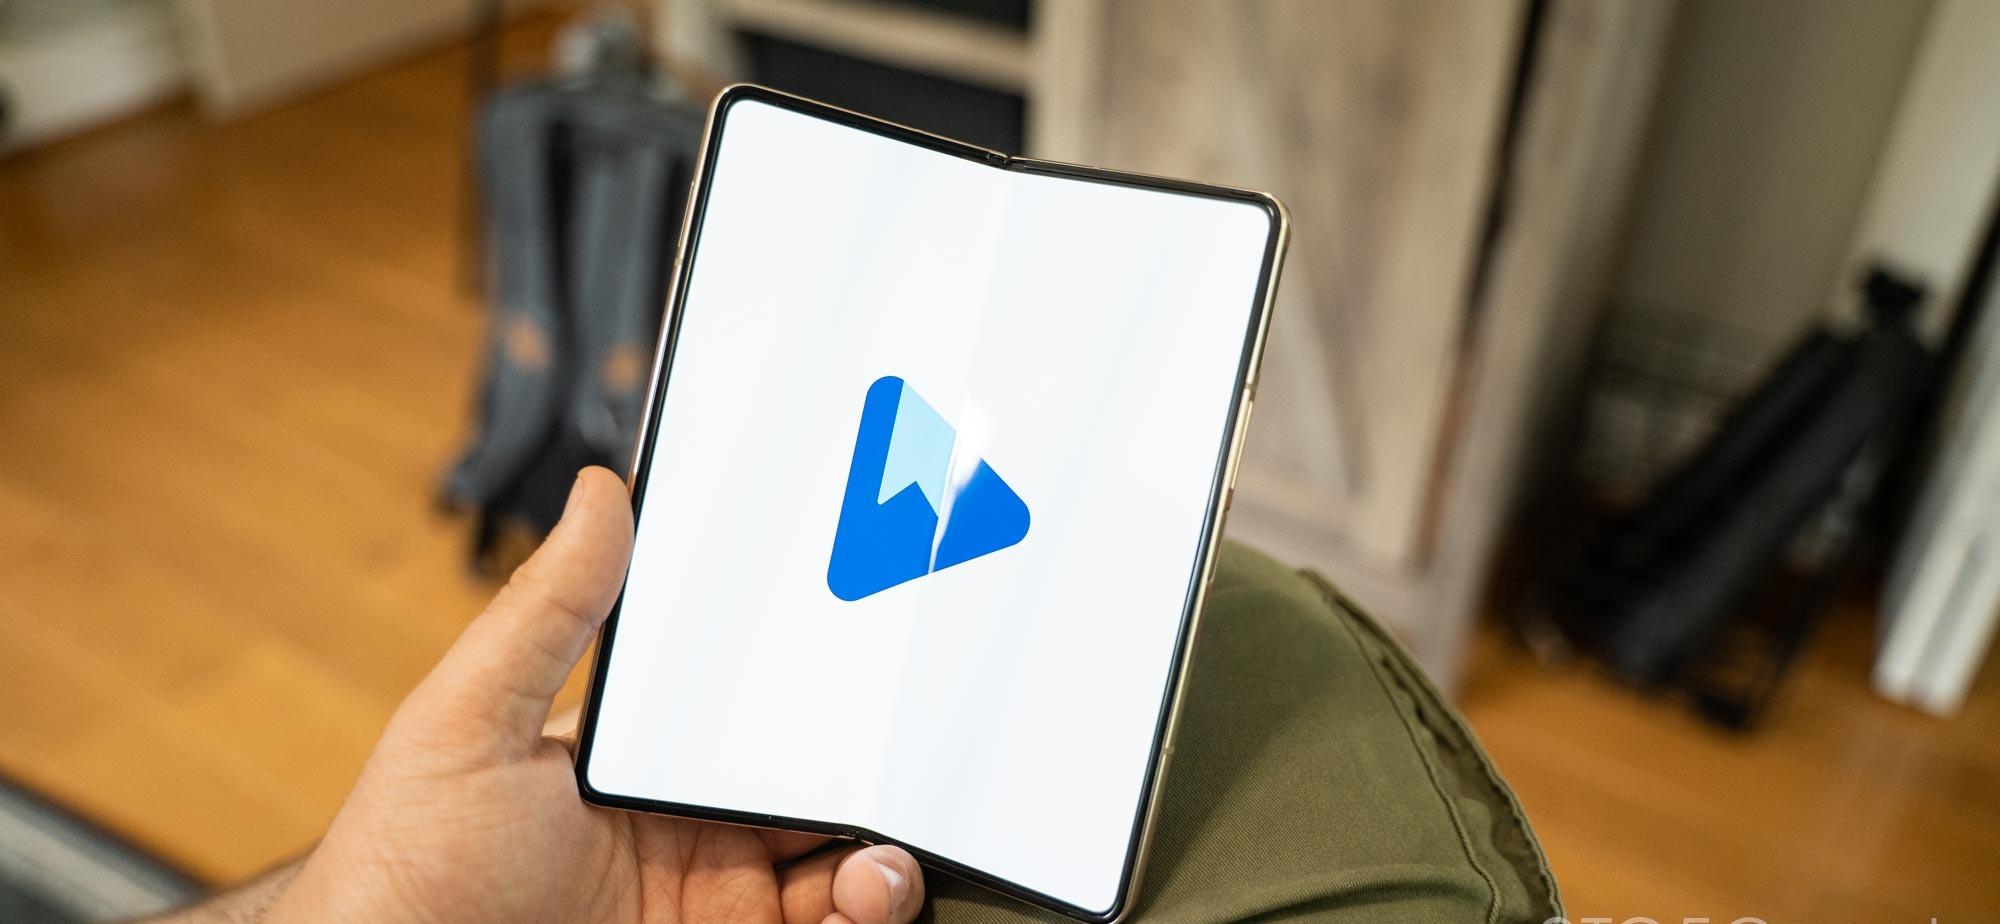 Google Play Books Material You Redesign: A Fresh Look for Android Users